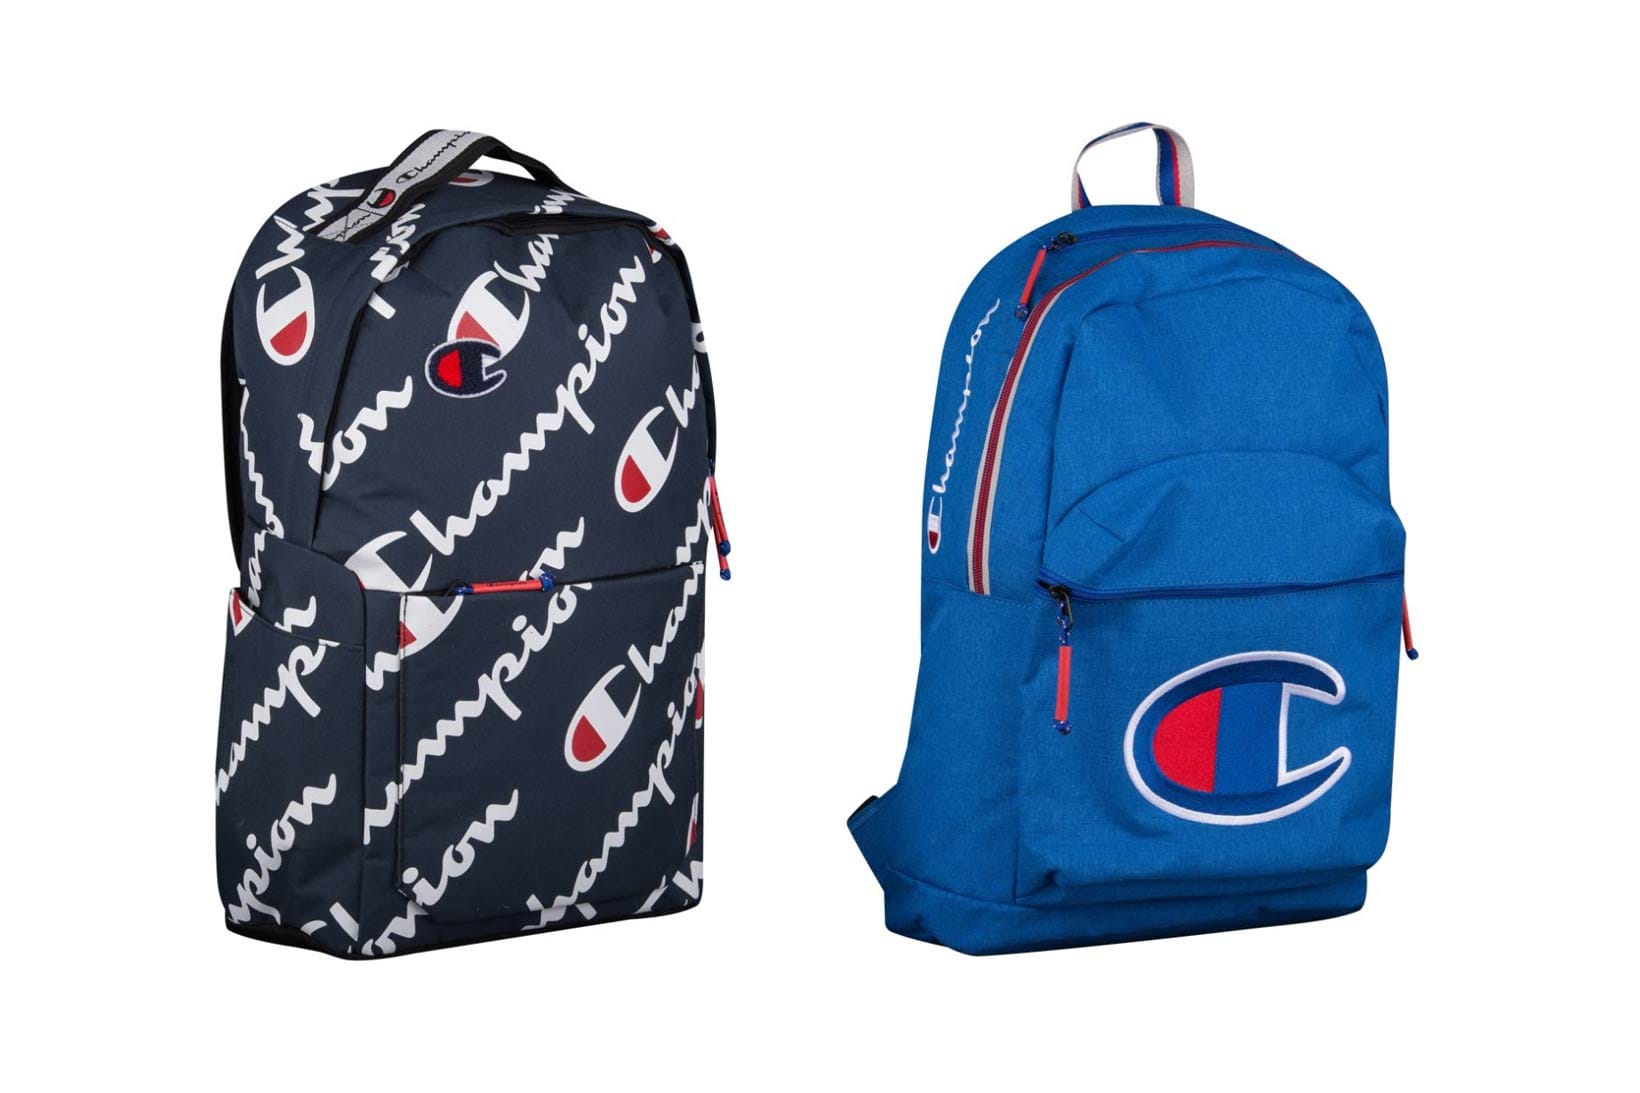 champion blue backpack